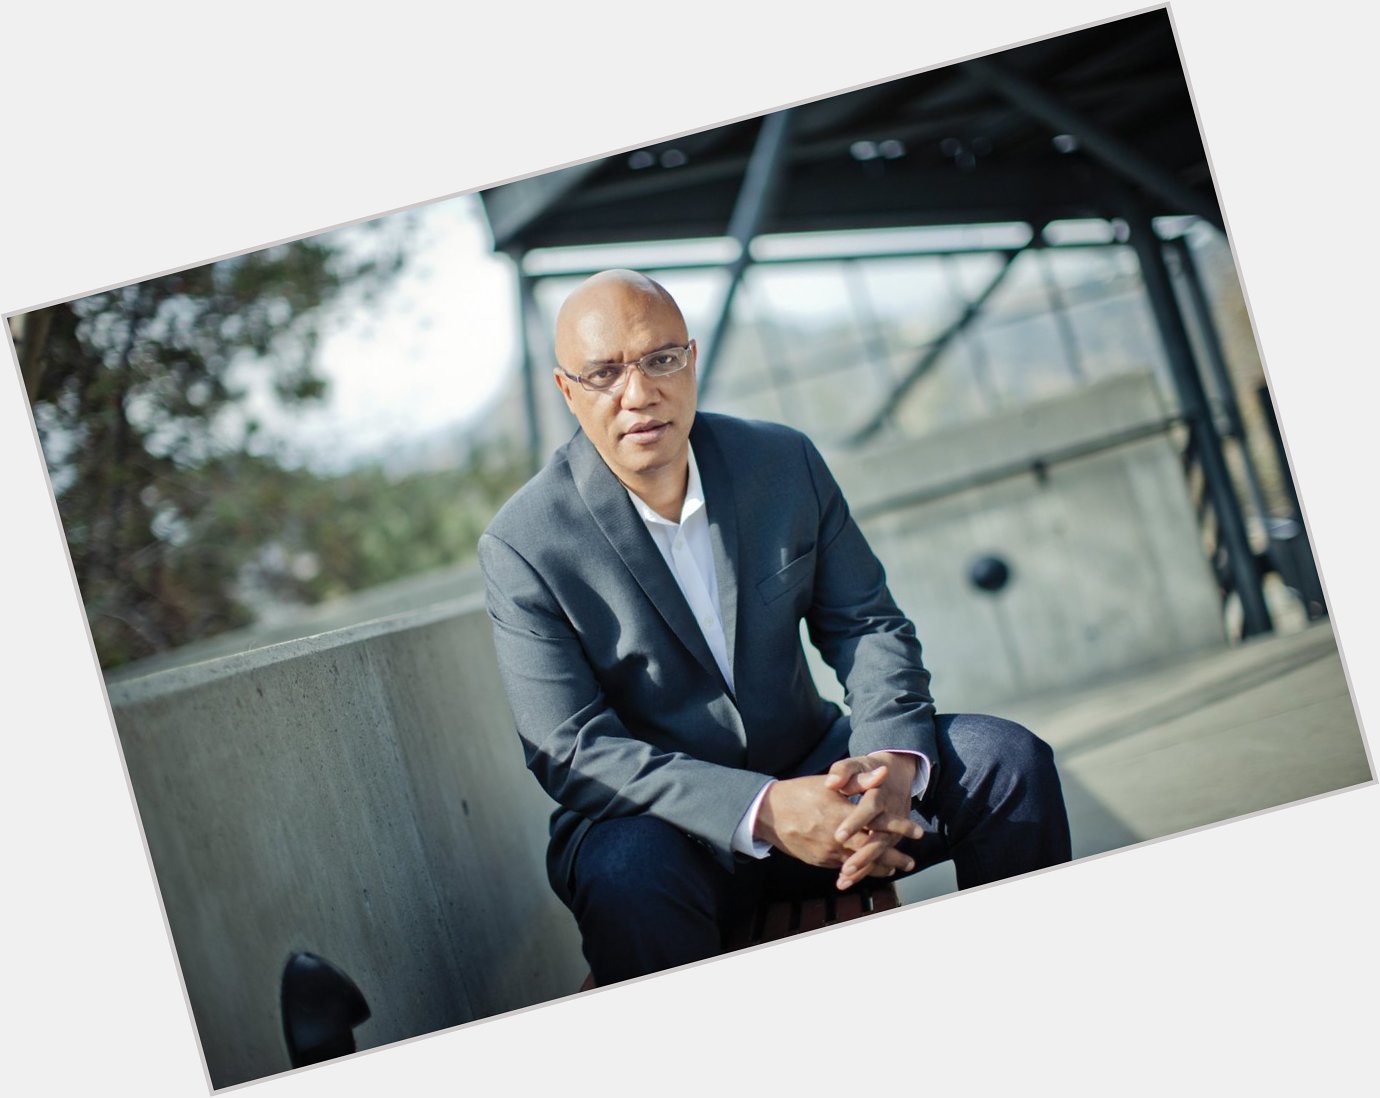 Wishing Billy Childs a very Happy Birthday from his Mack Avenue family 